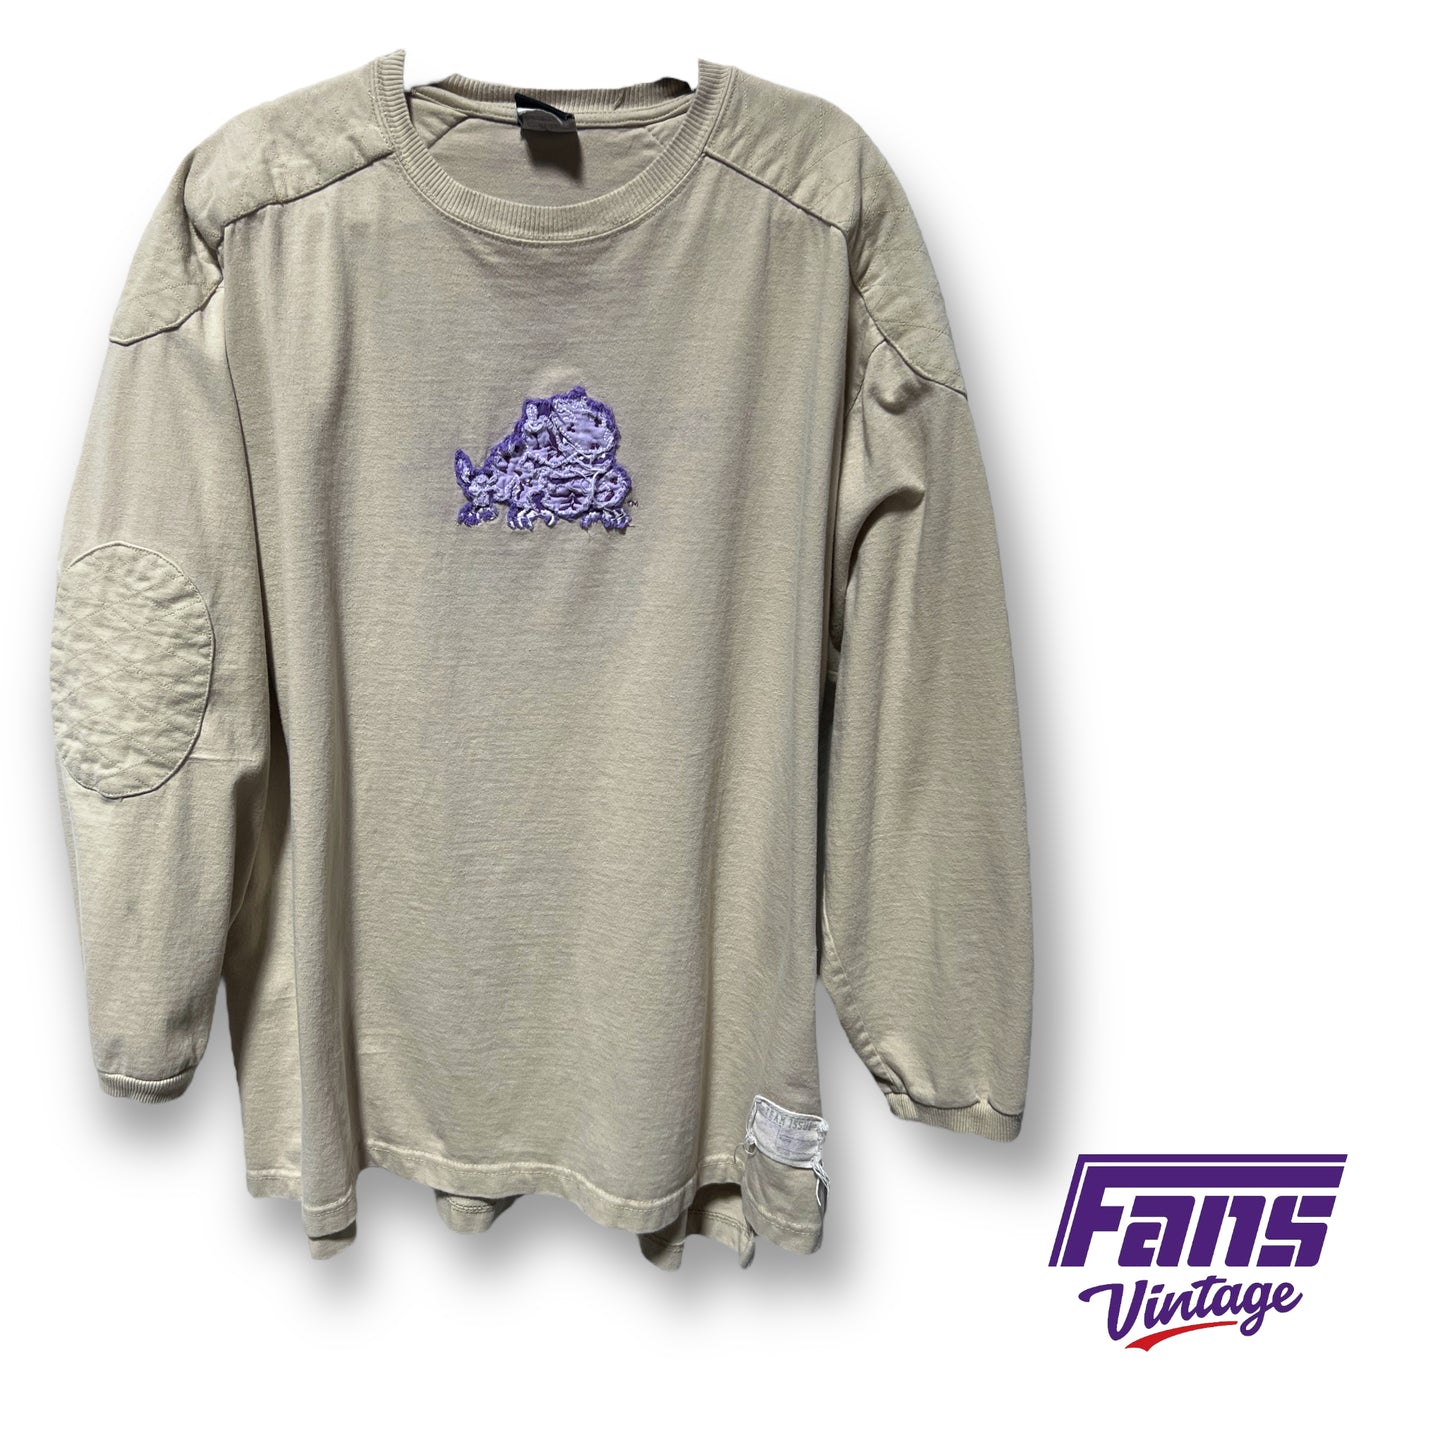 RARE! Y2K Vintage TCU throwback football jersey style sweatshirt - awesome details!